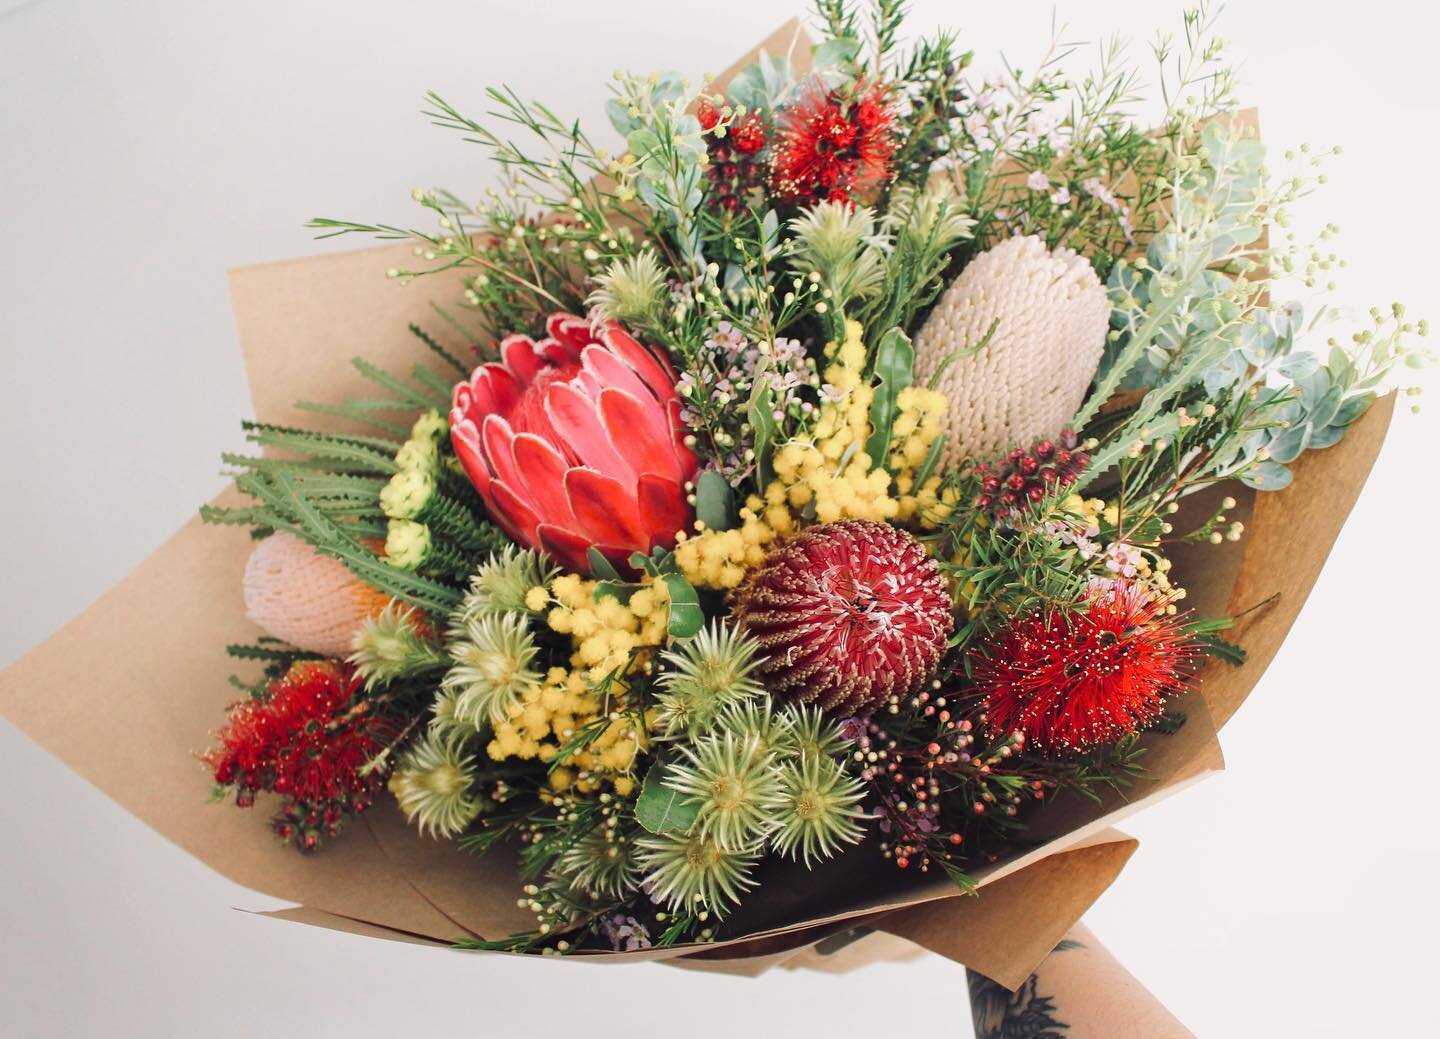 DELUXE 💐
The bundle of wildflowers from your dreams ✨
Available to order online for pickup or delivery, link in bio!
&bull;
#flowers #florist #wildflowers #nativeflowers #perthflowers #perthflorist #perthflowerdelivery #perthsmallbusiness #perthloca